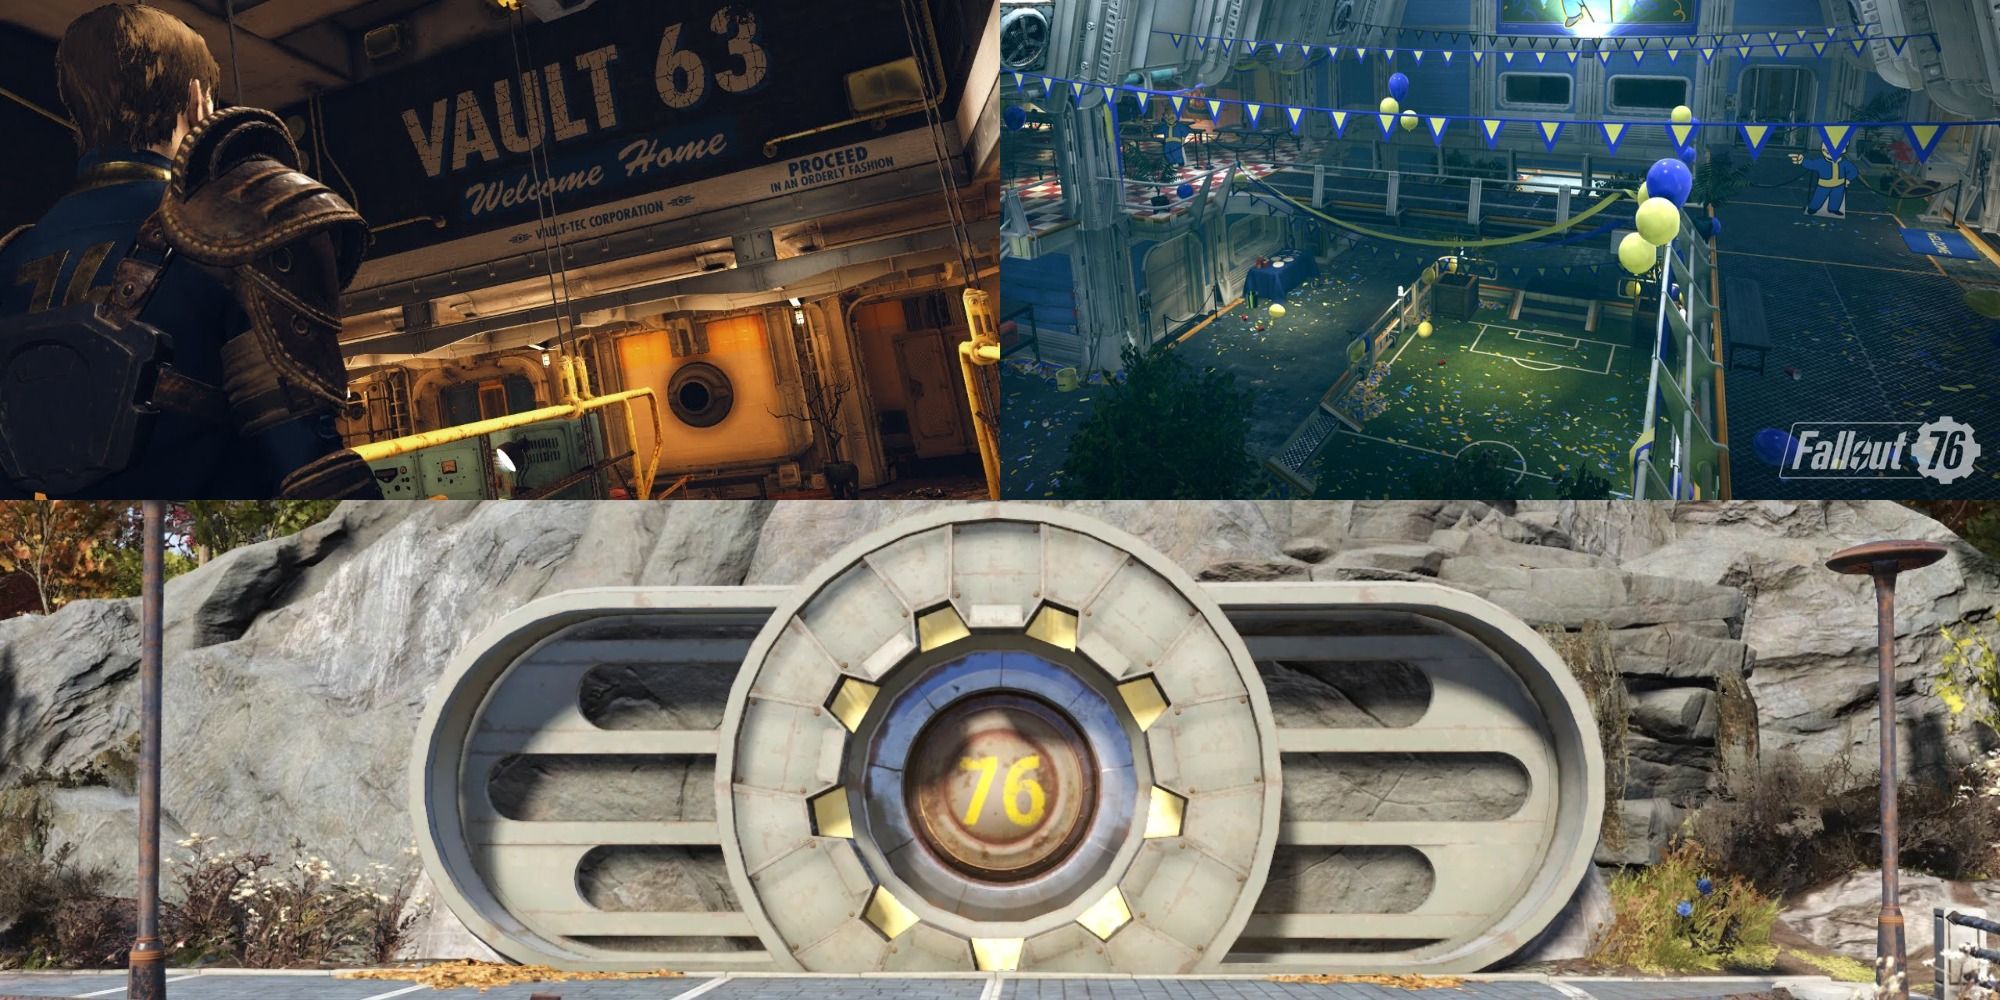 Fallout 76 Vaults Header with t6 entrance on bottom, Vault 63 screenshot with player character on top left and interior of 76 on top right